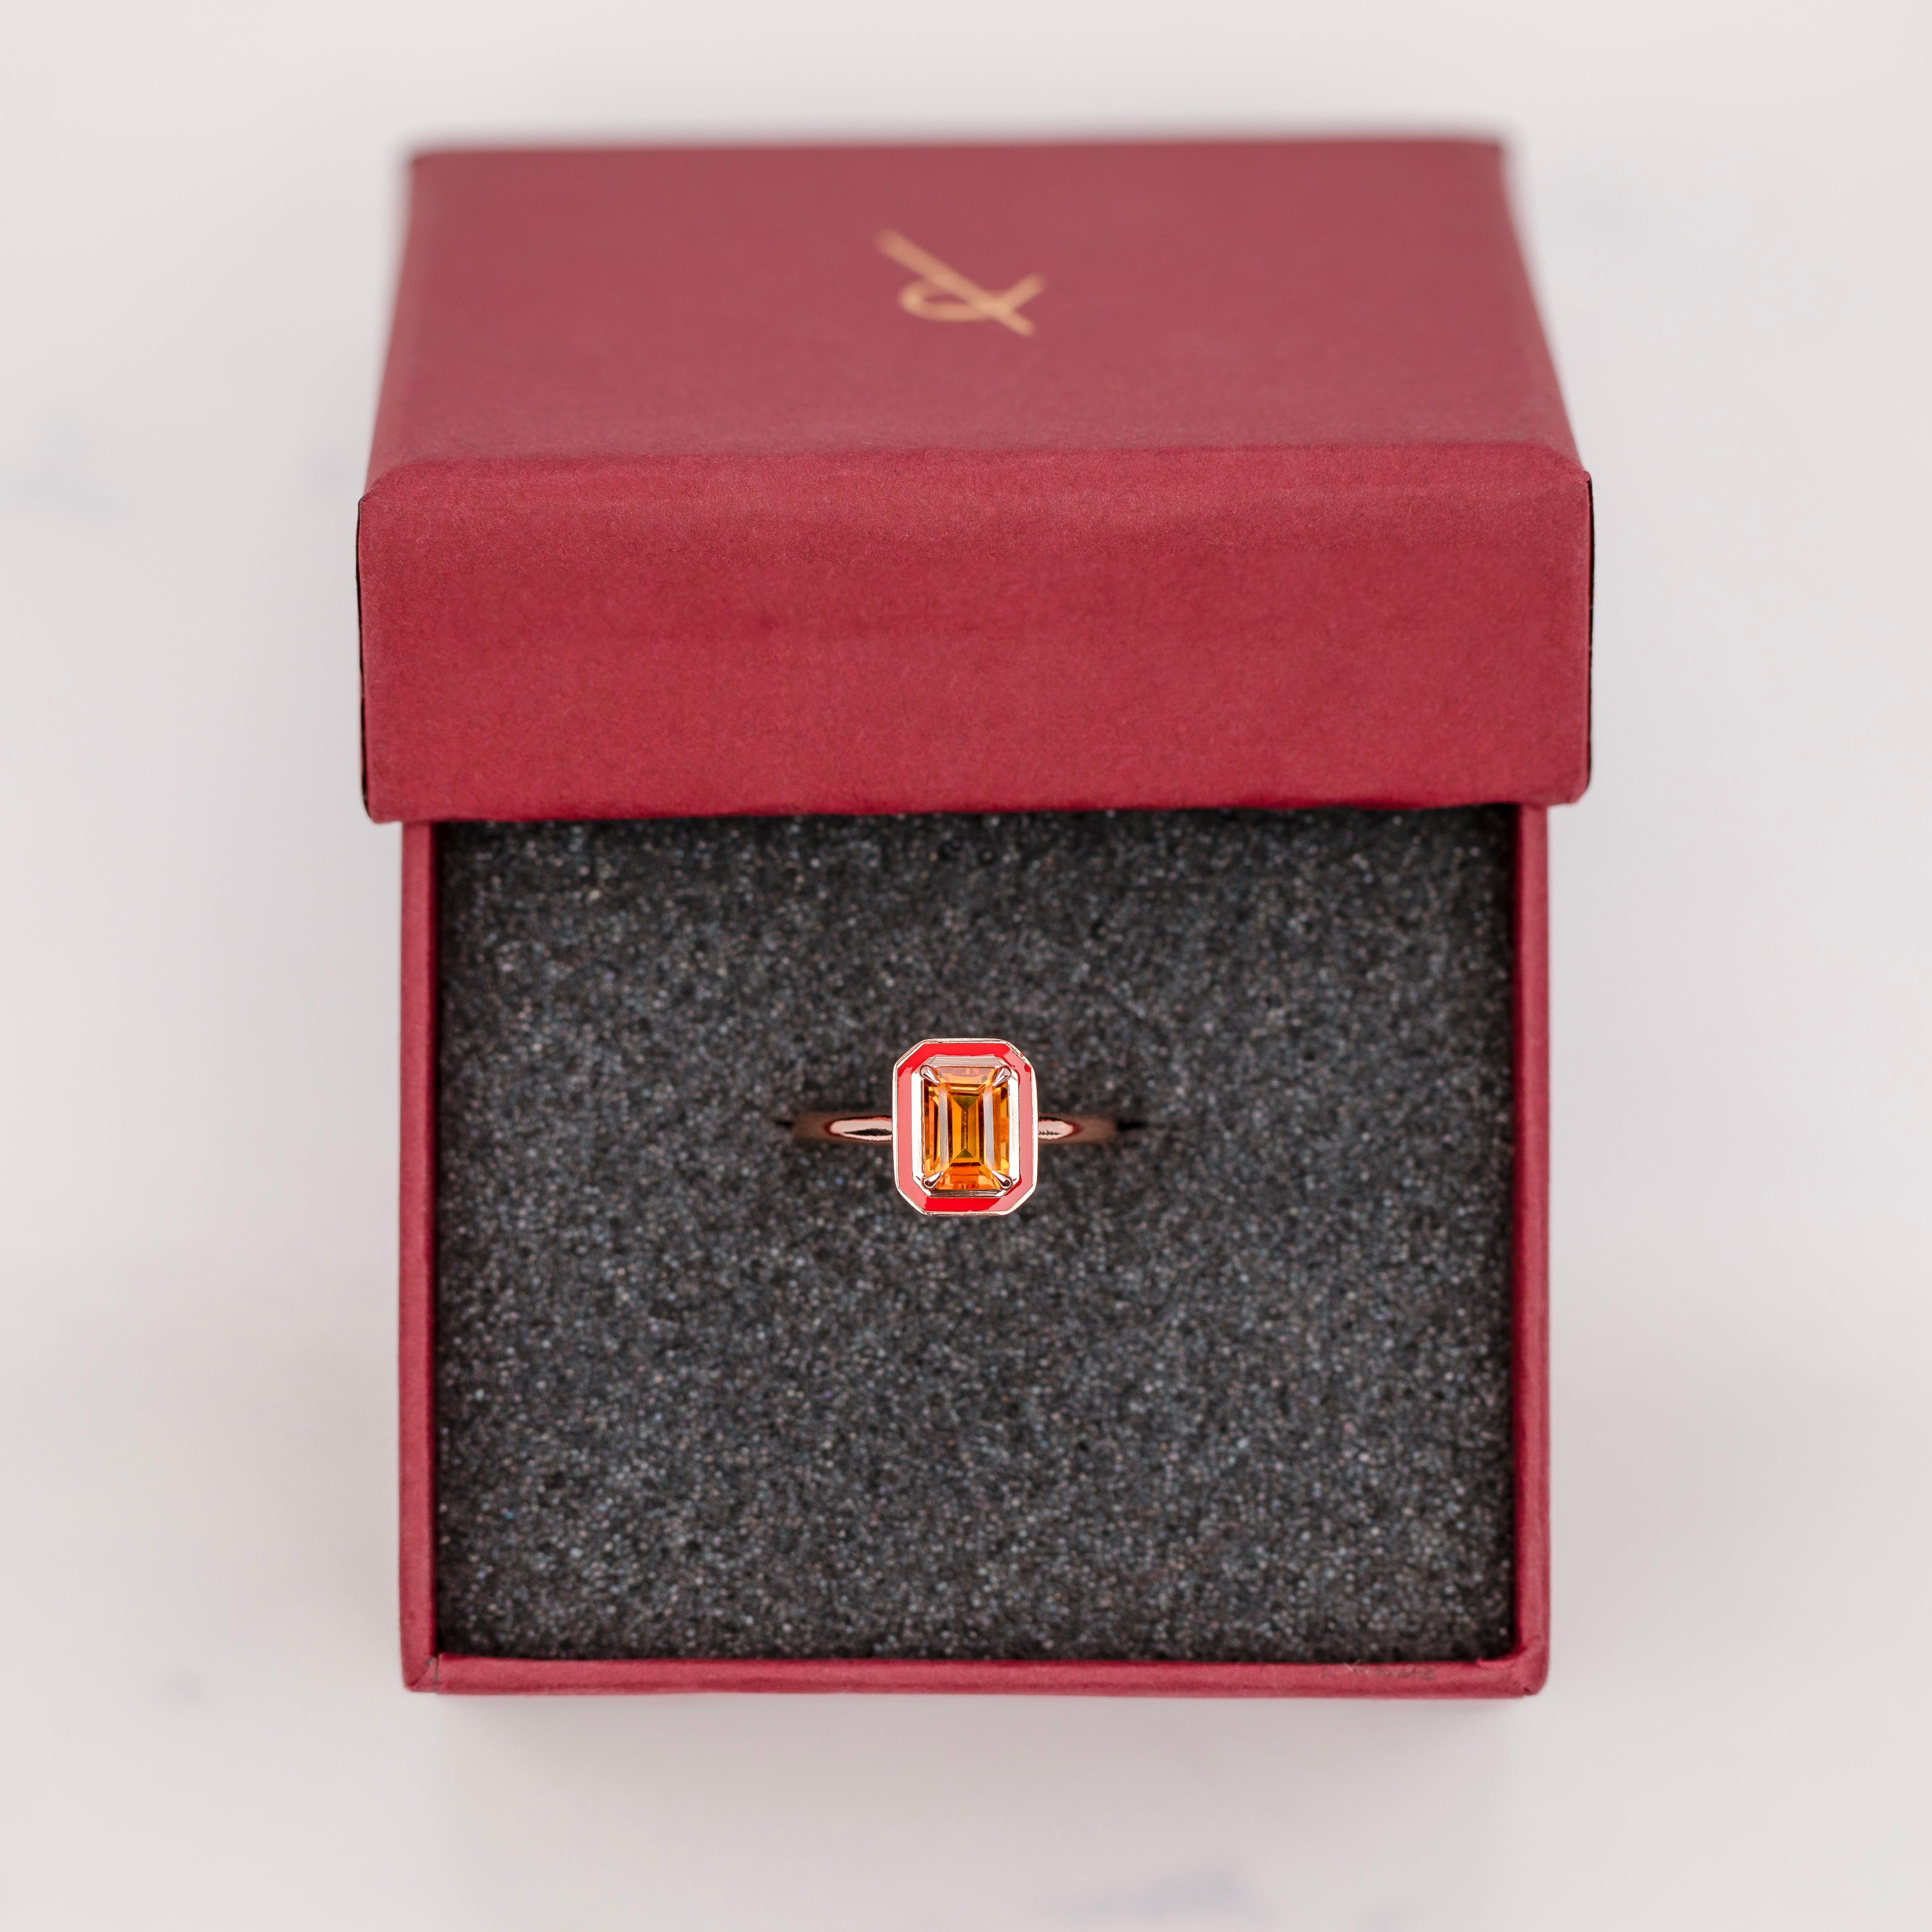 Art Deco Style, 0.90-1.00 Ct Citrine Stone and Colorful Enamel, 14K Gold Ring For Sale 4